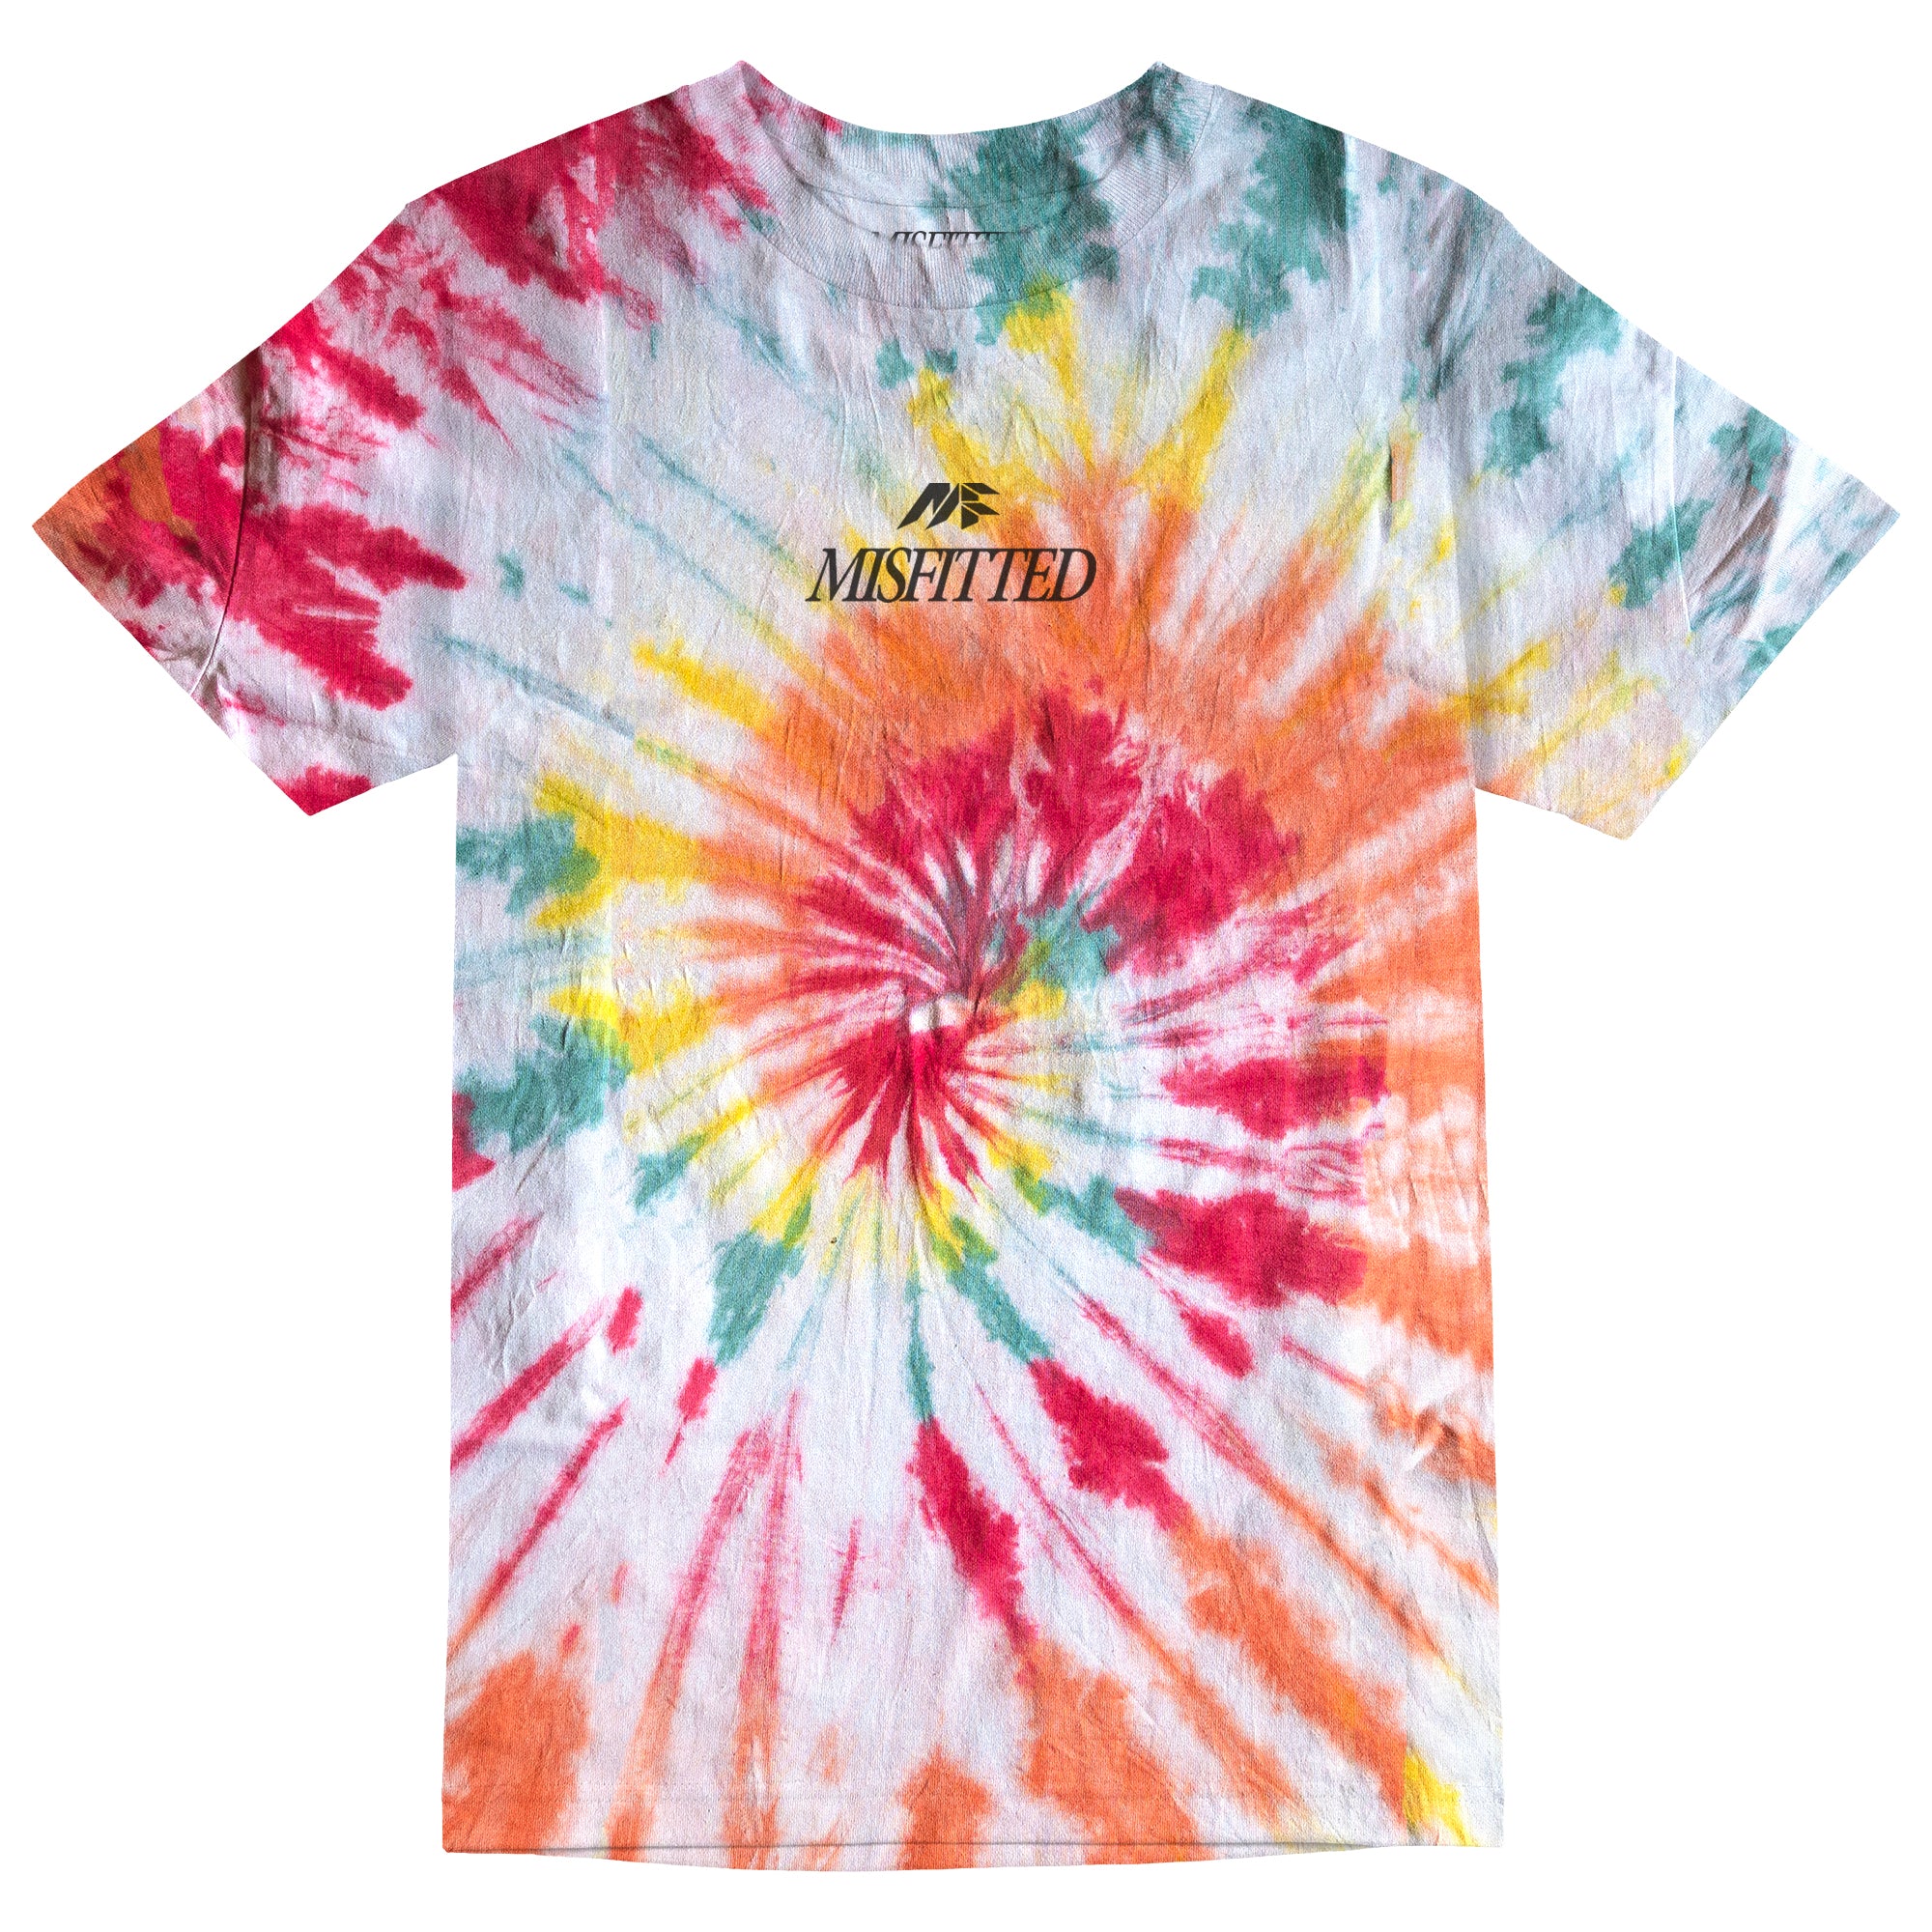 Custom Tie Dye T-Shirt - Create your own - MisFitted